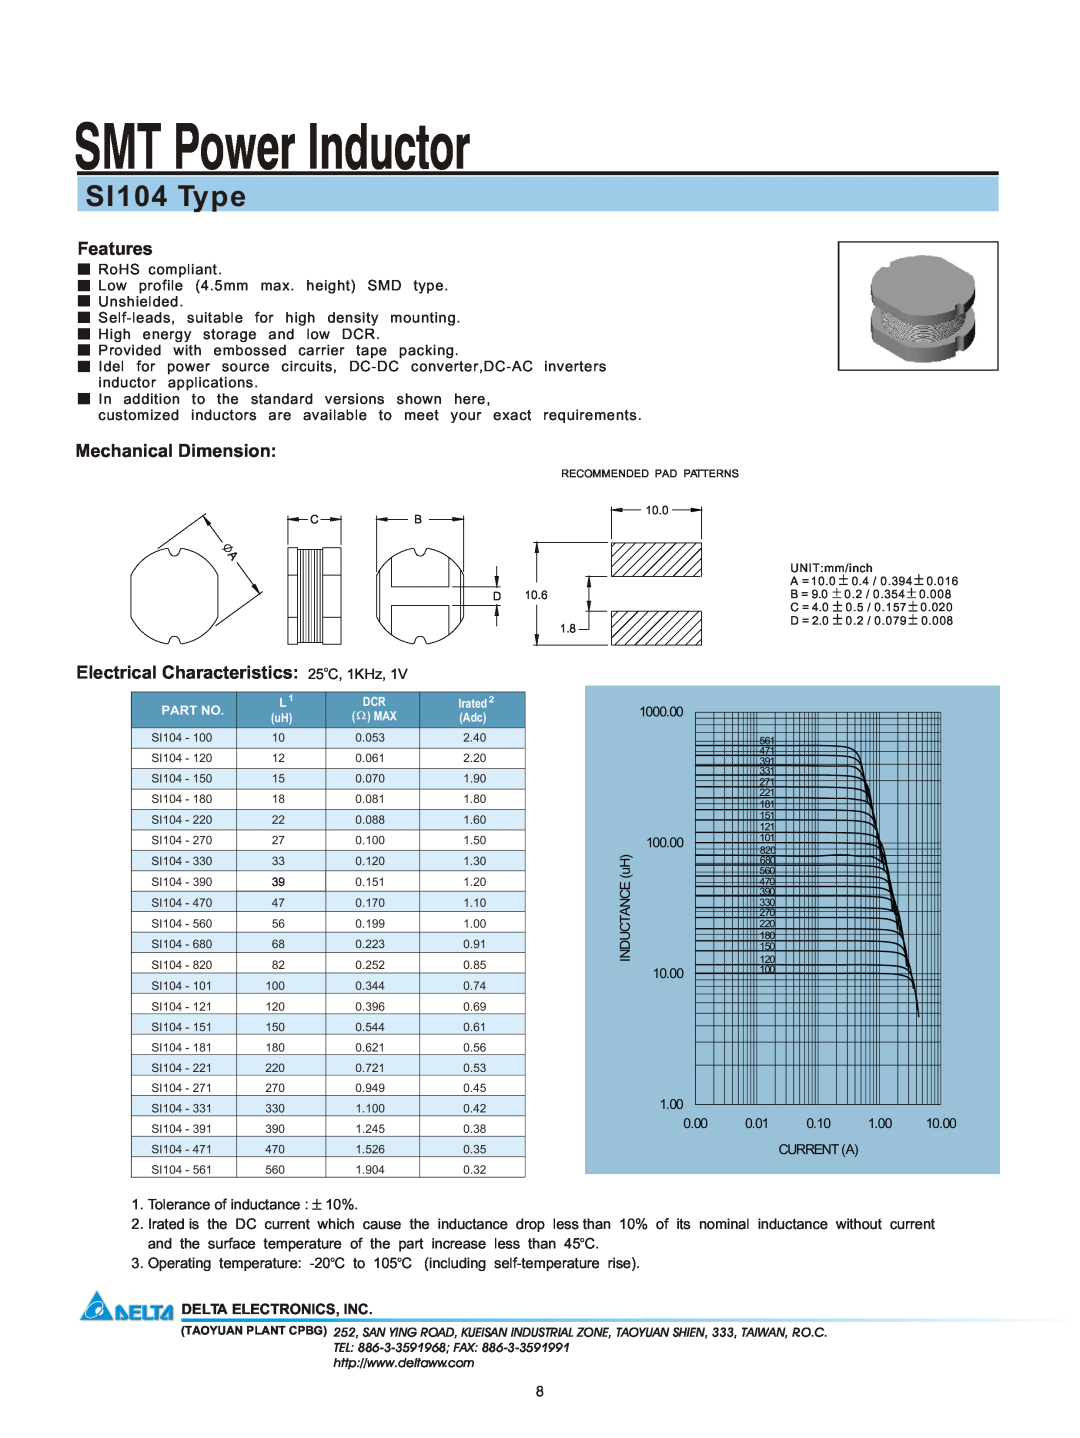 Delta Electronics manual SMT Power Inductor, SI104 Type, Features, Mechanical Dimension, Delta Electronics, Inc 